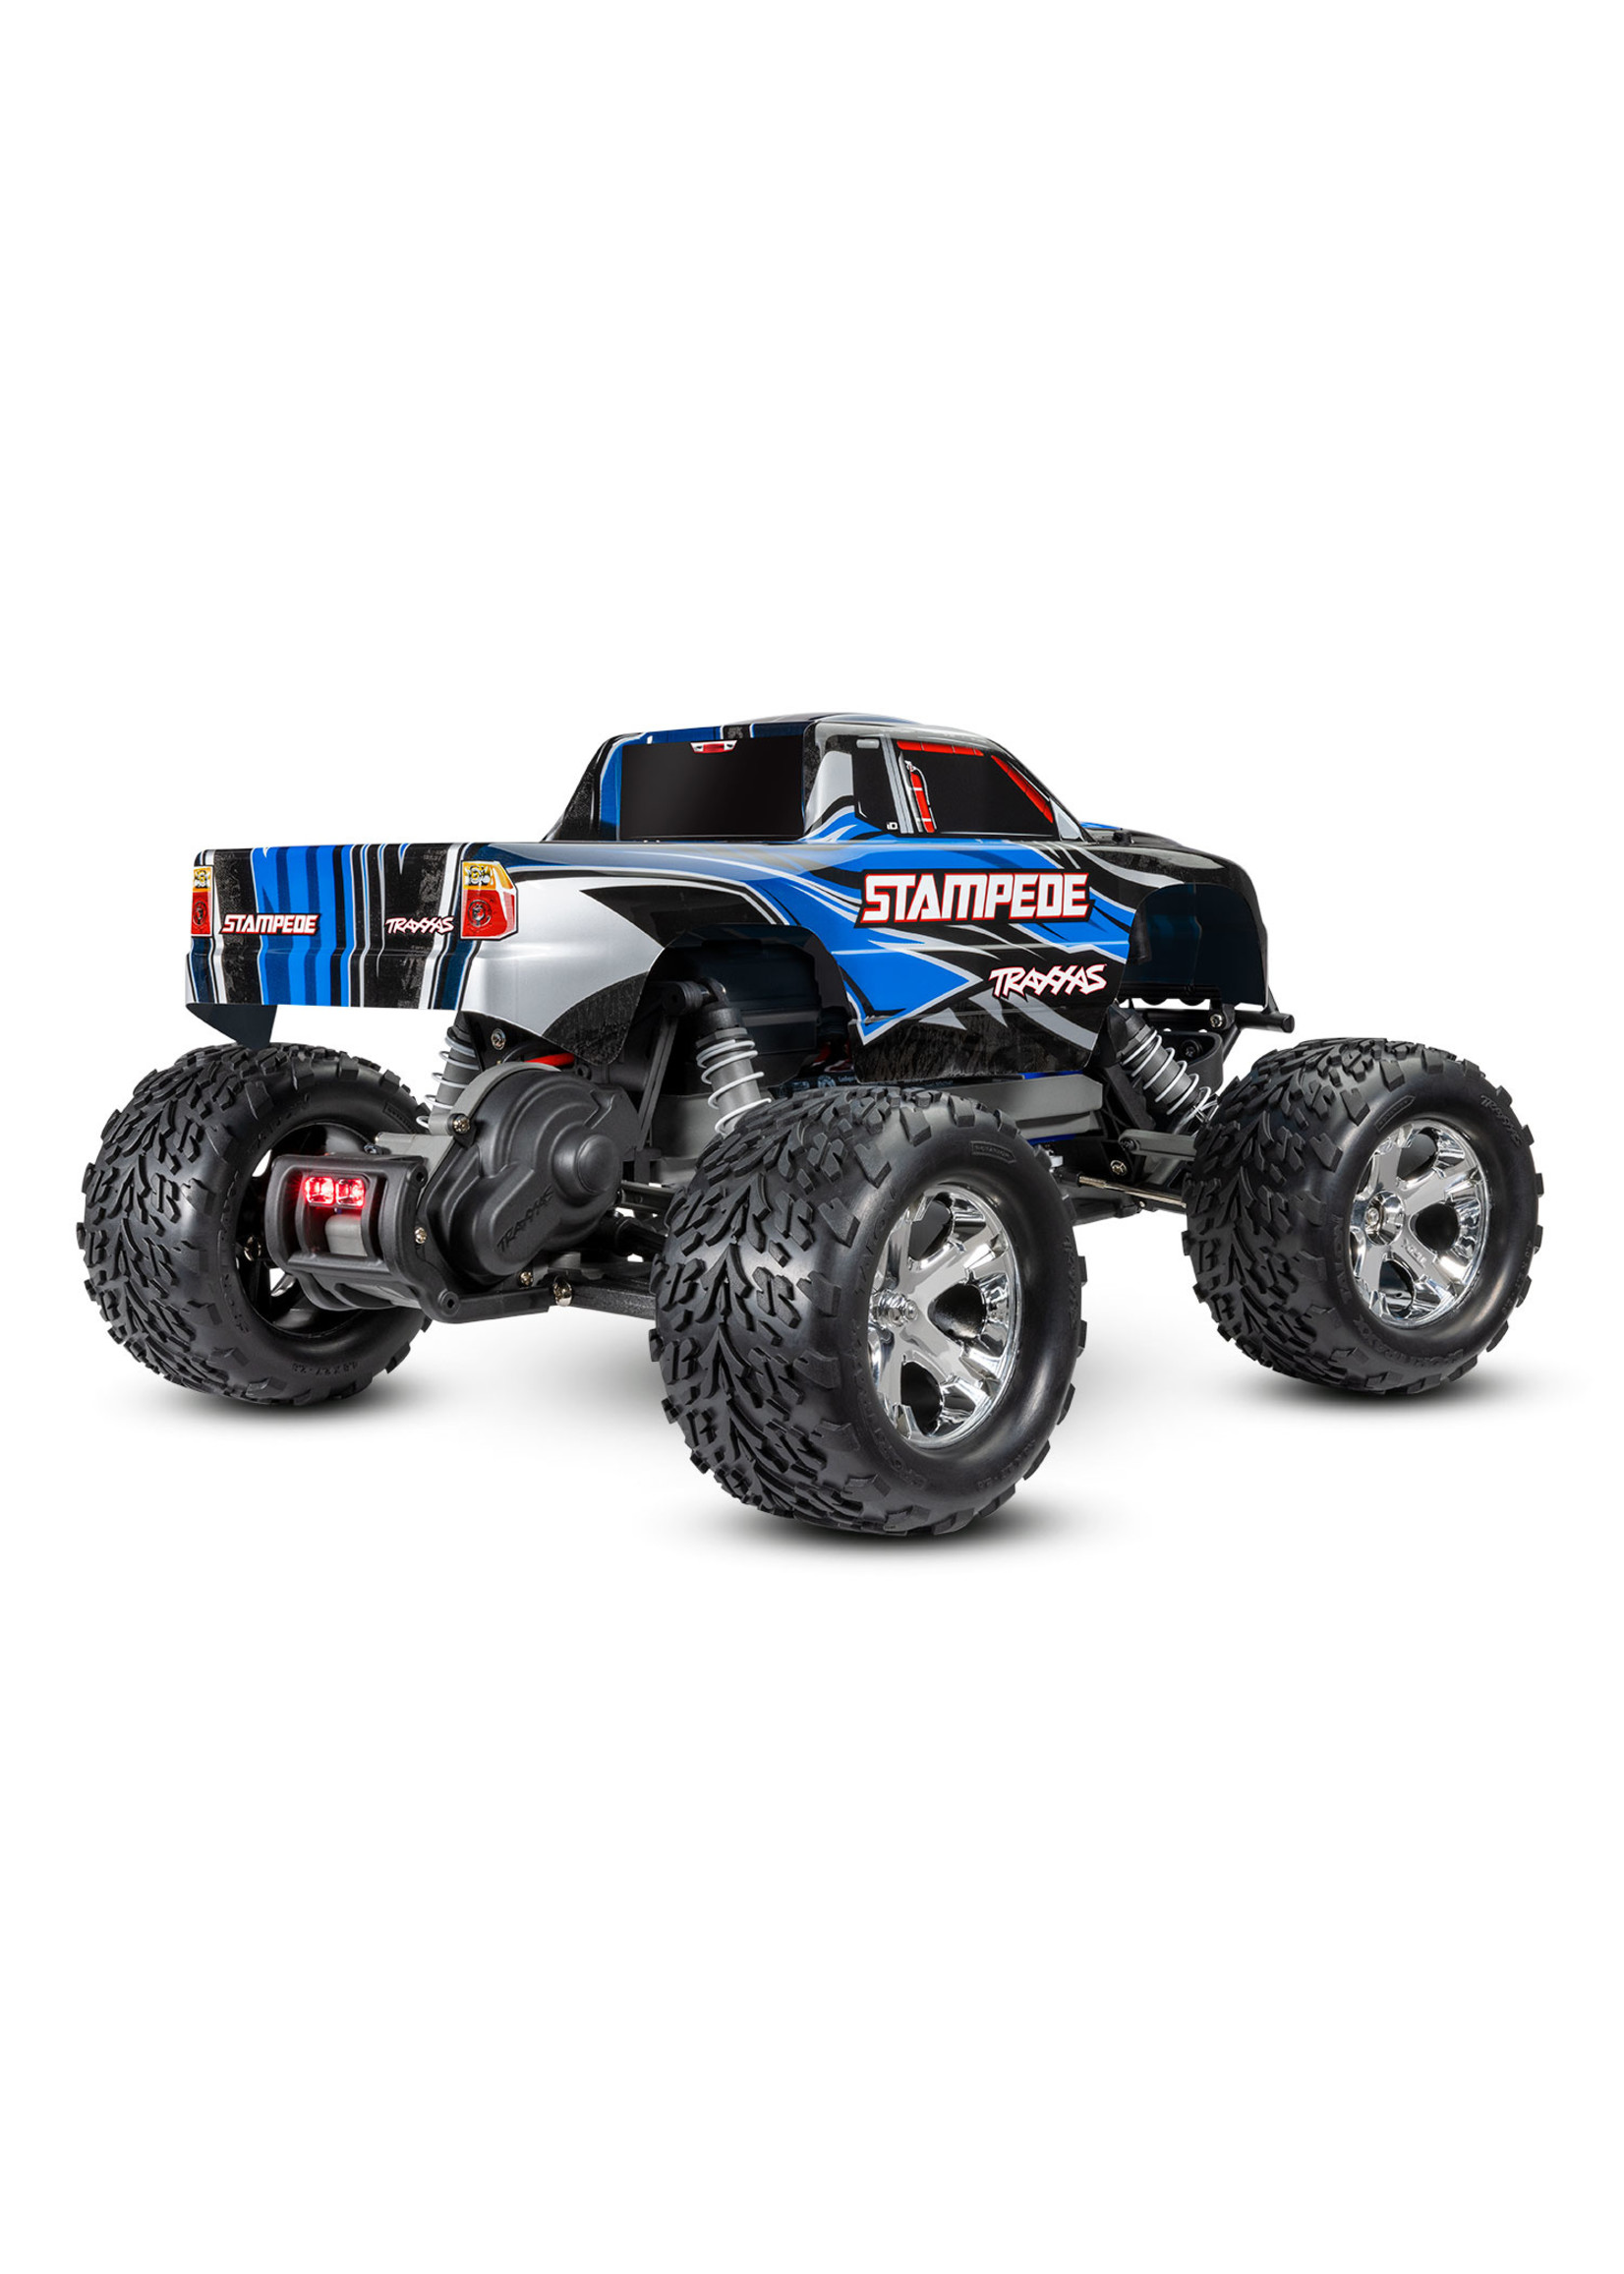 Traxxas 1/10 Stampede 2WD RTR Monster Truck with Lights - Blue